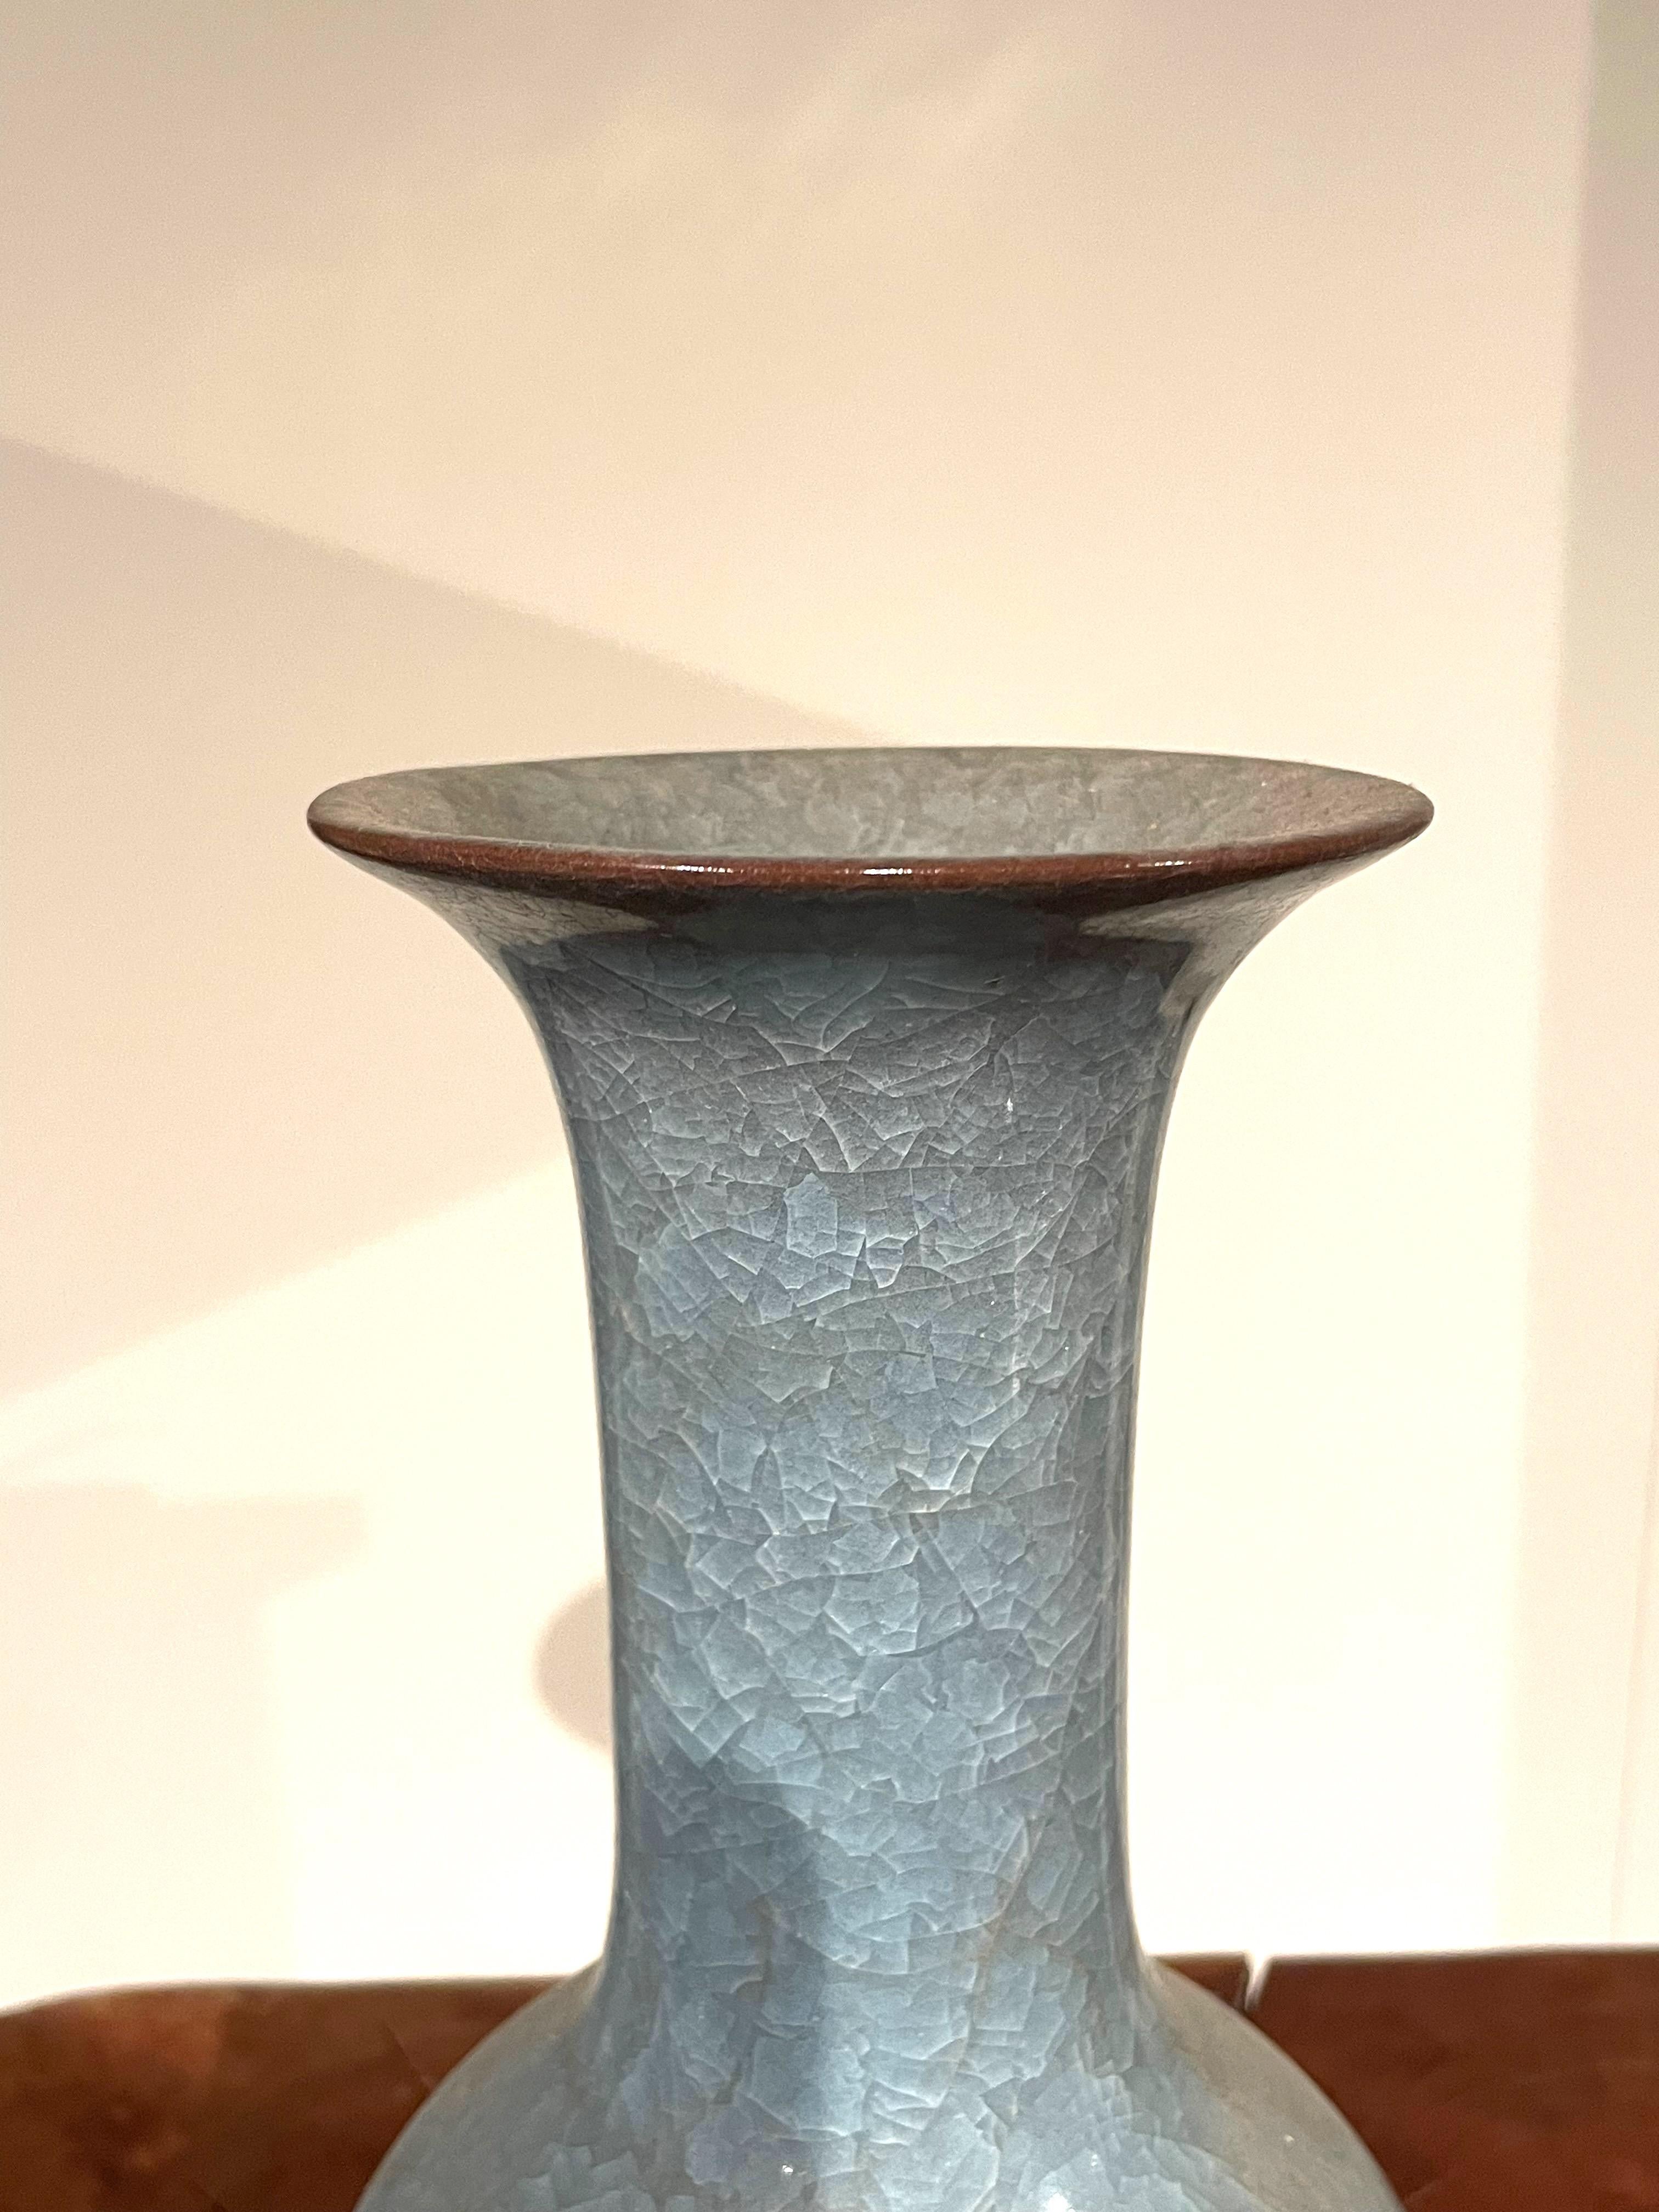 Contemporary Chinese blue vase with crackle glaze.
Elongated tubular neck.
From a large collection with varying shapes and sizes.
ARRIVING APRIL